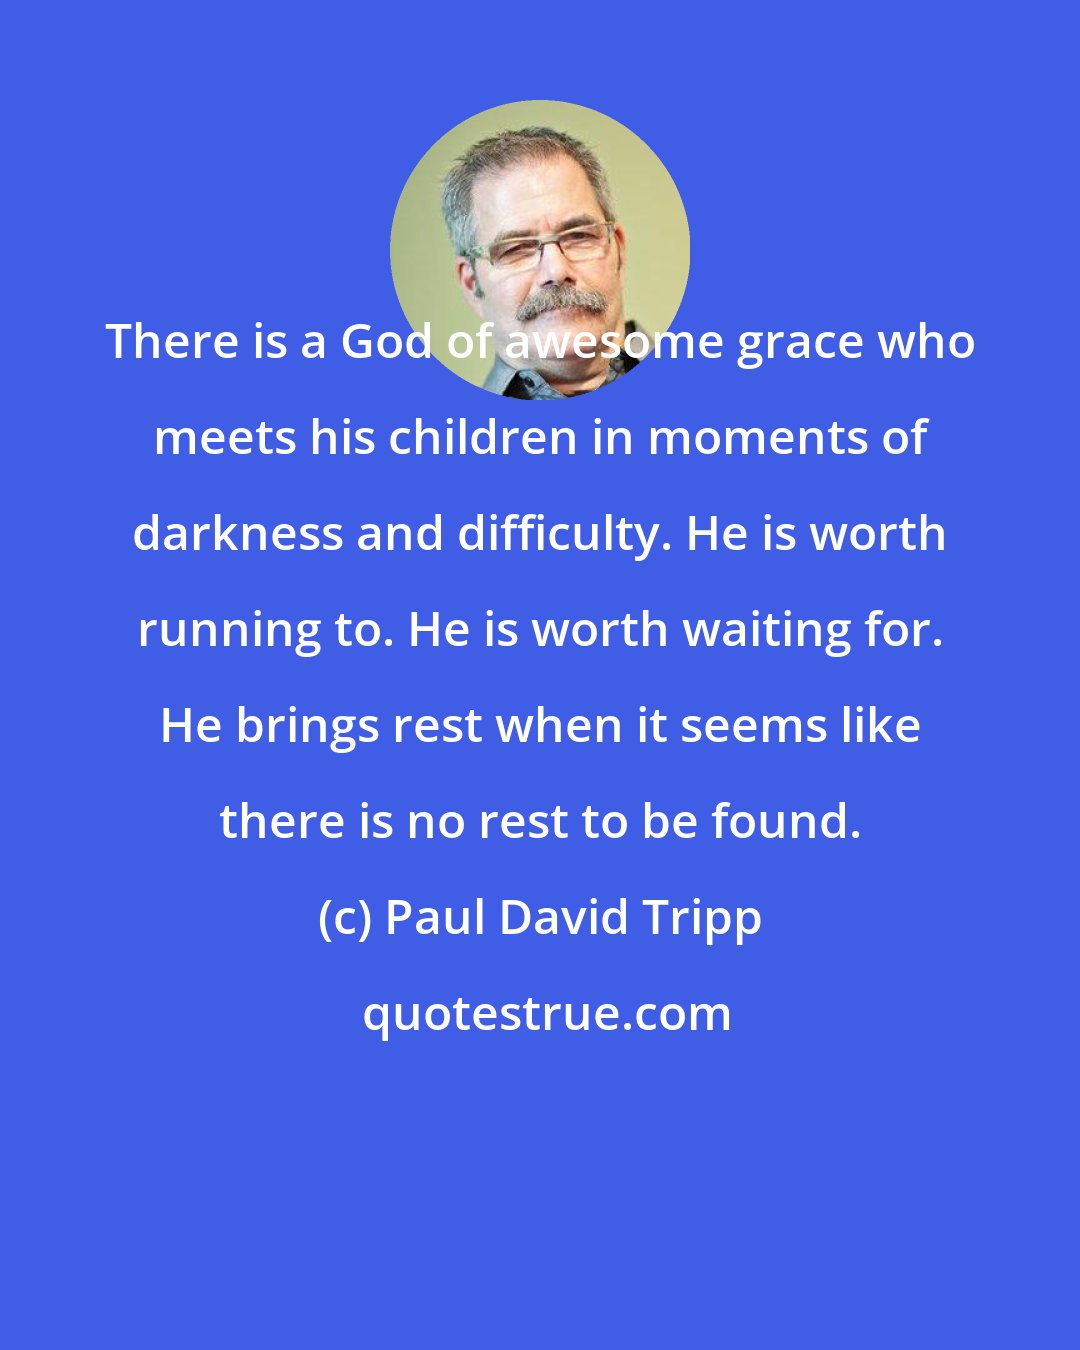 Paul David Tripp: There is a God of awesome grace who meets his children in moments of darkness and difficulty. He is worth running to. He is worth waiting for. He brings rest when it seems like there is no rest to be found.